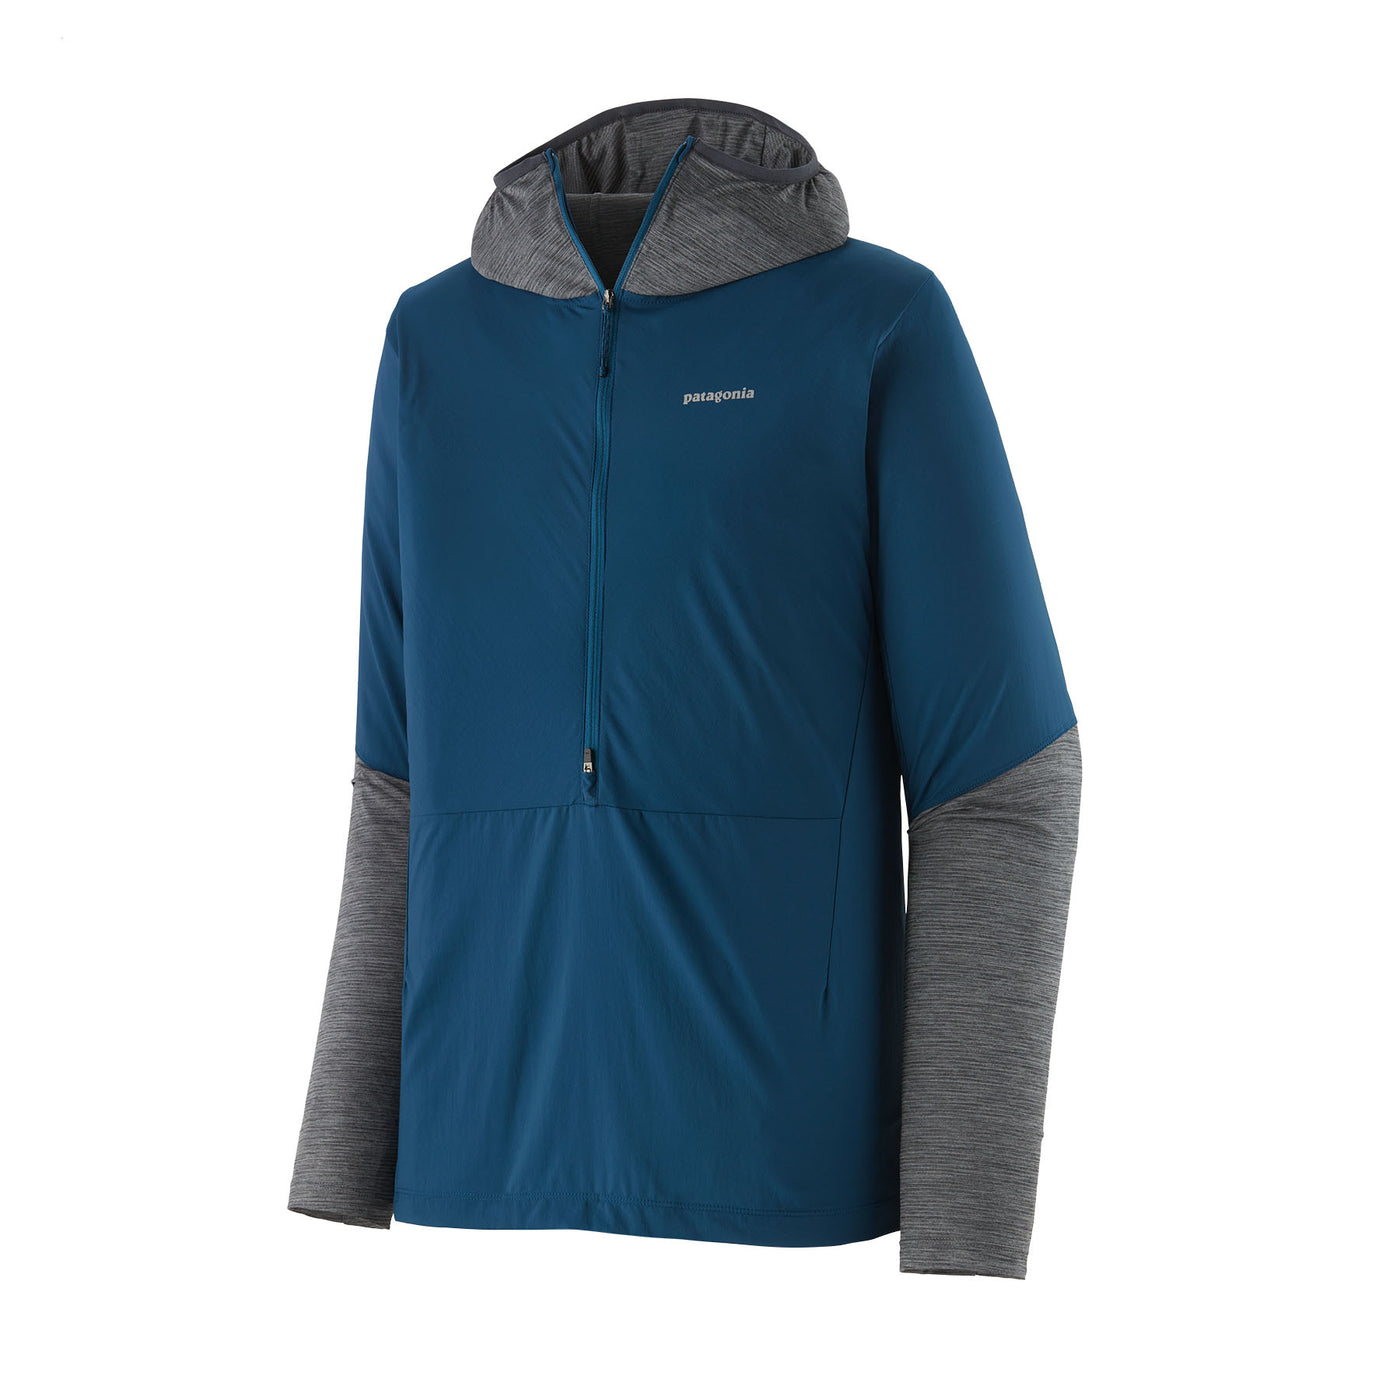 Airshed Pro Pullover Men's F23